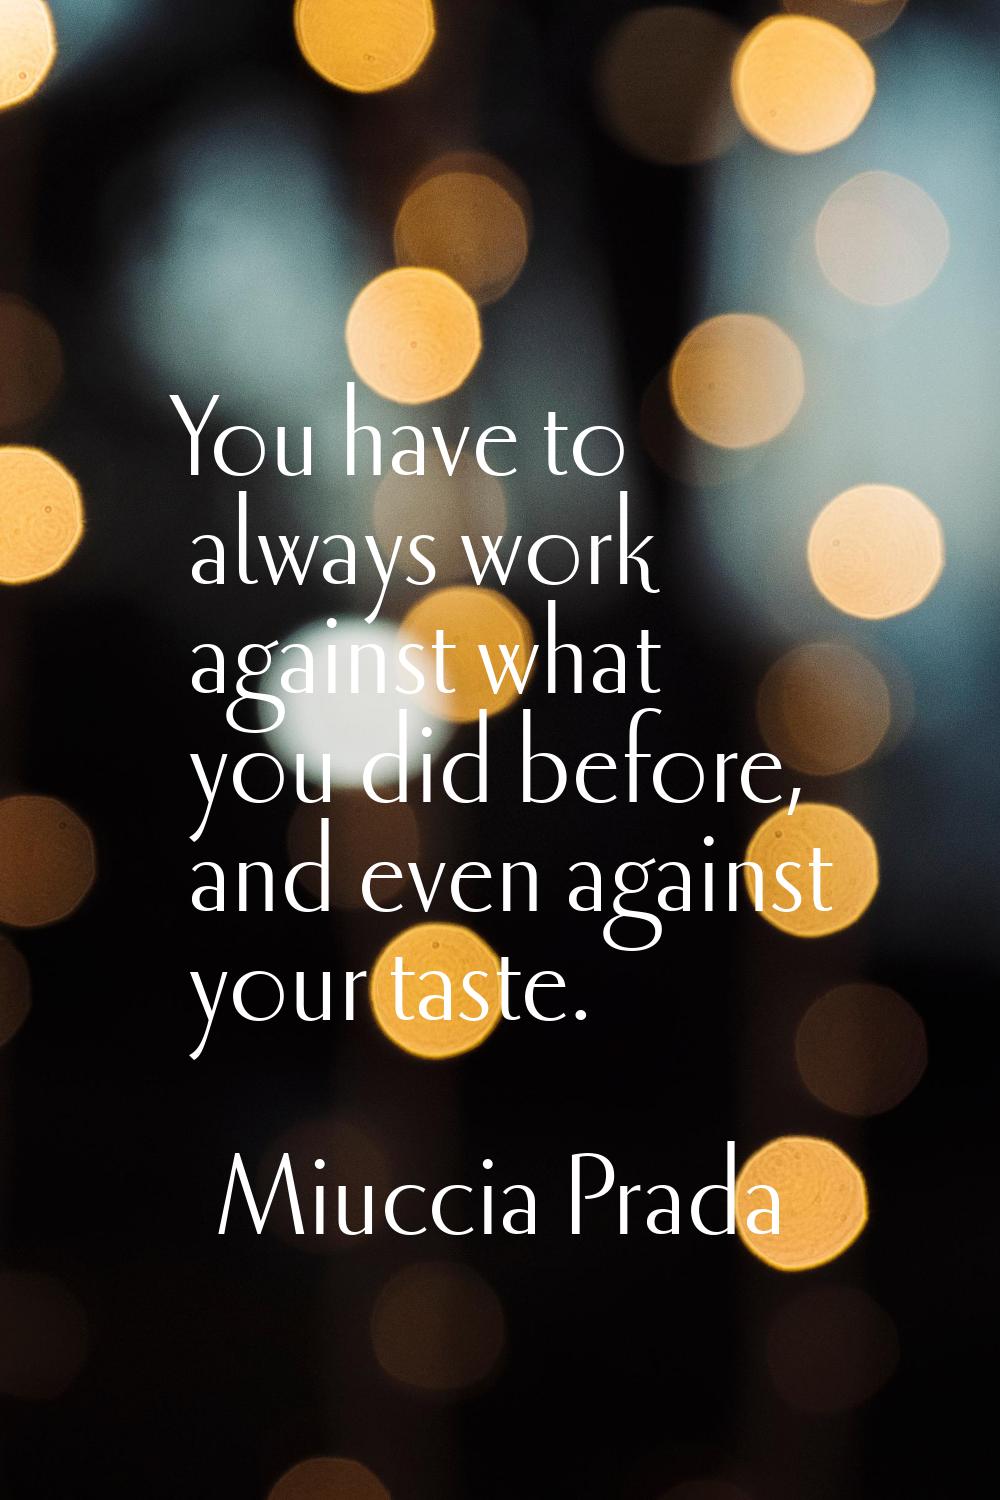 You have to always work against what you did before, and even against your taste.